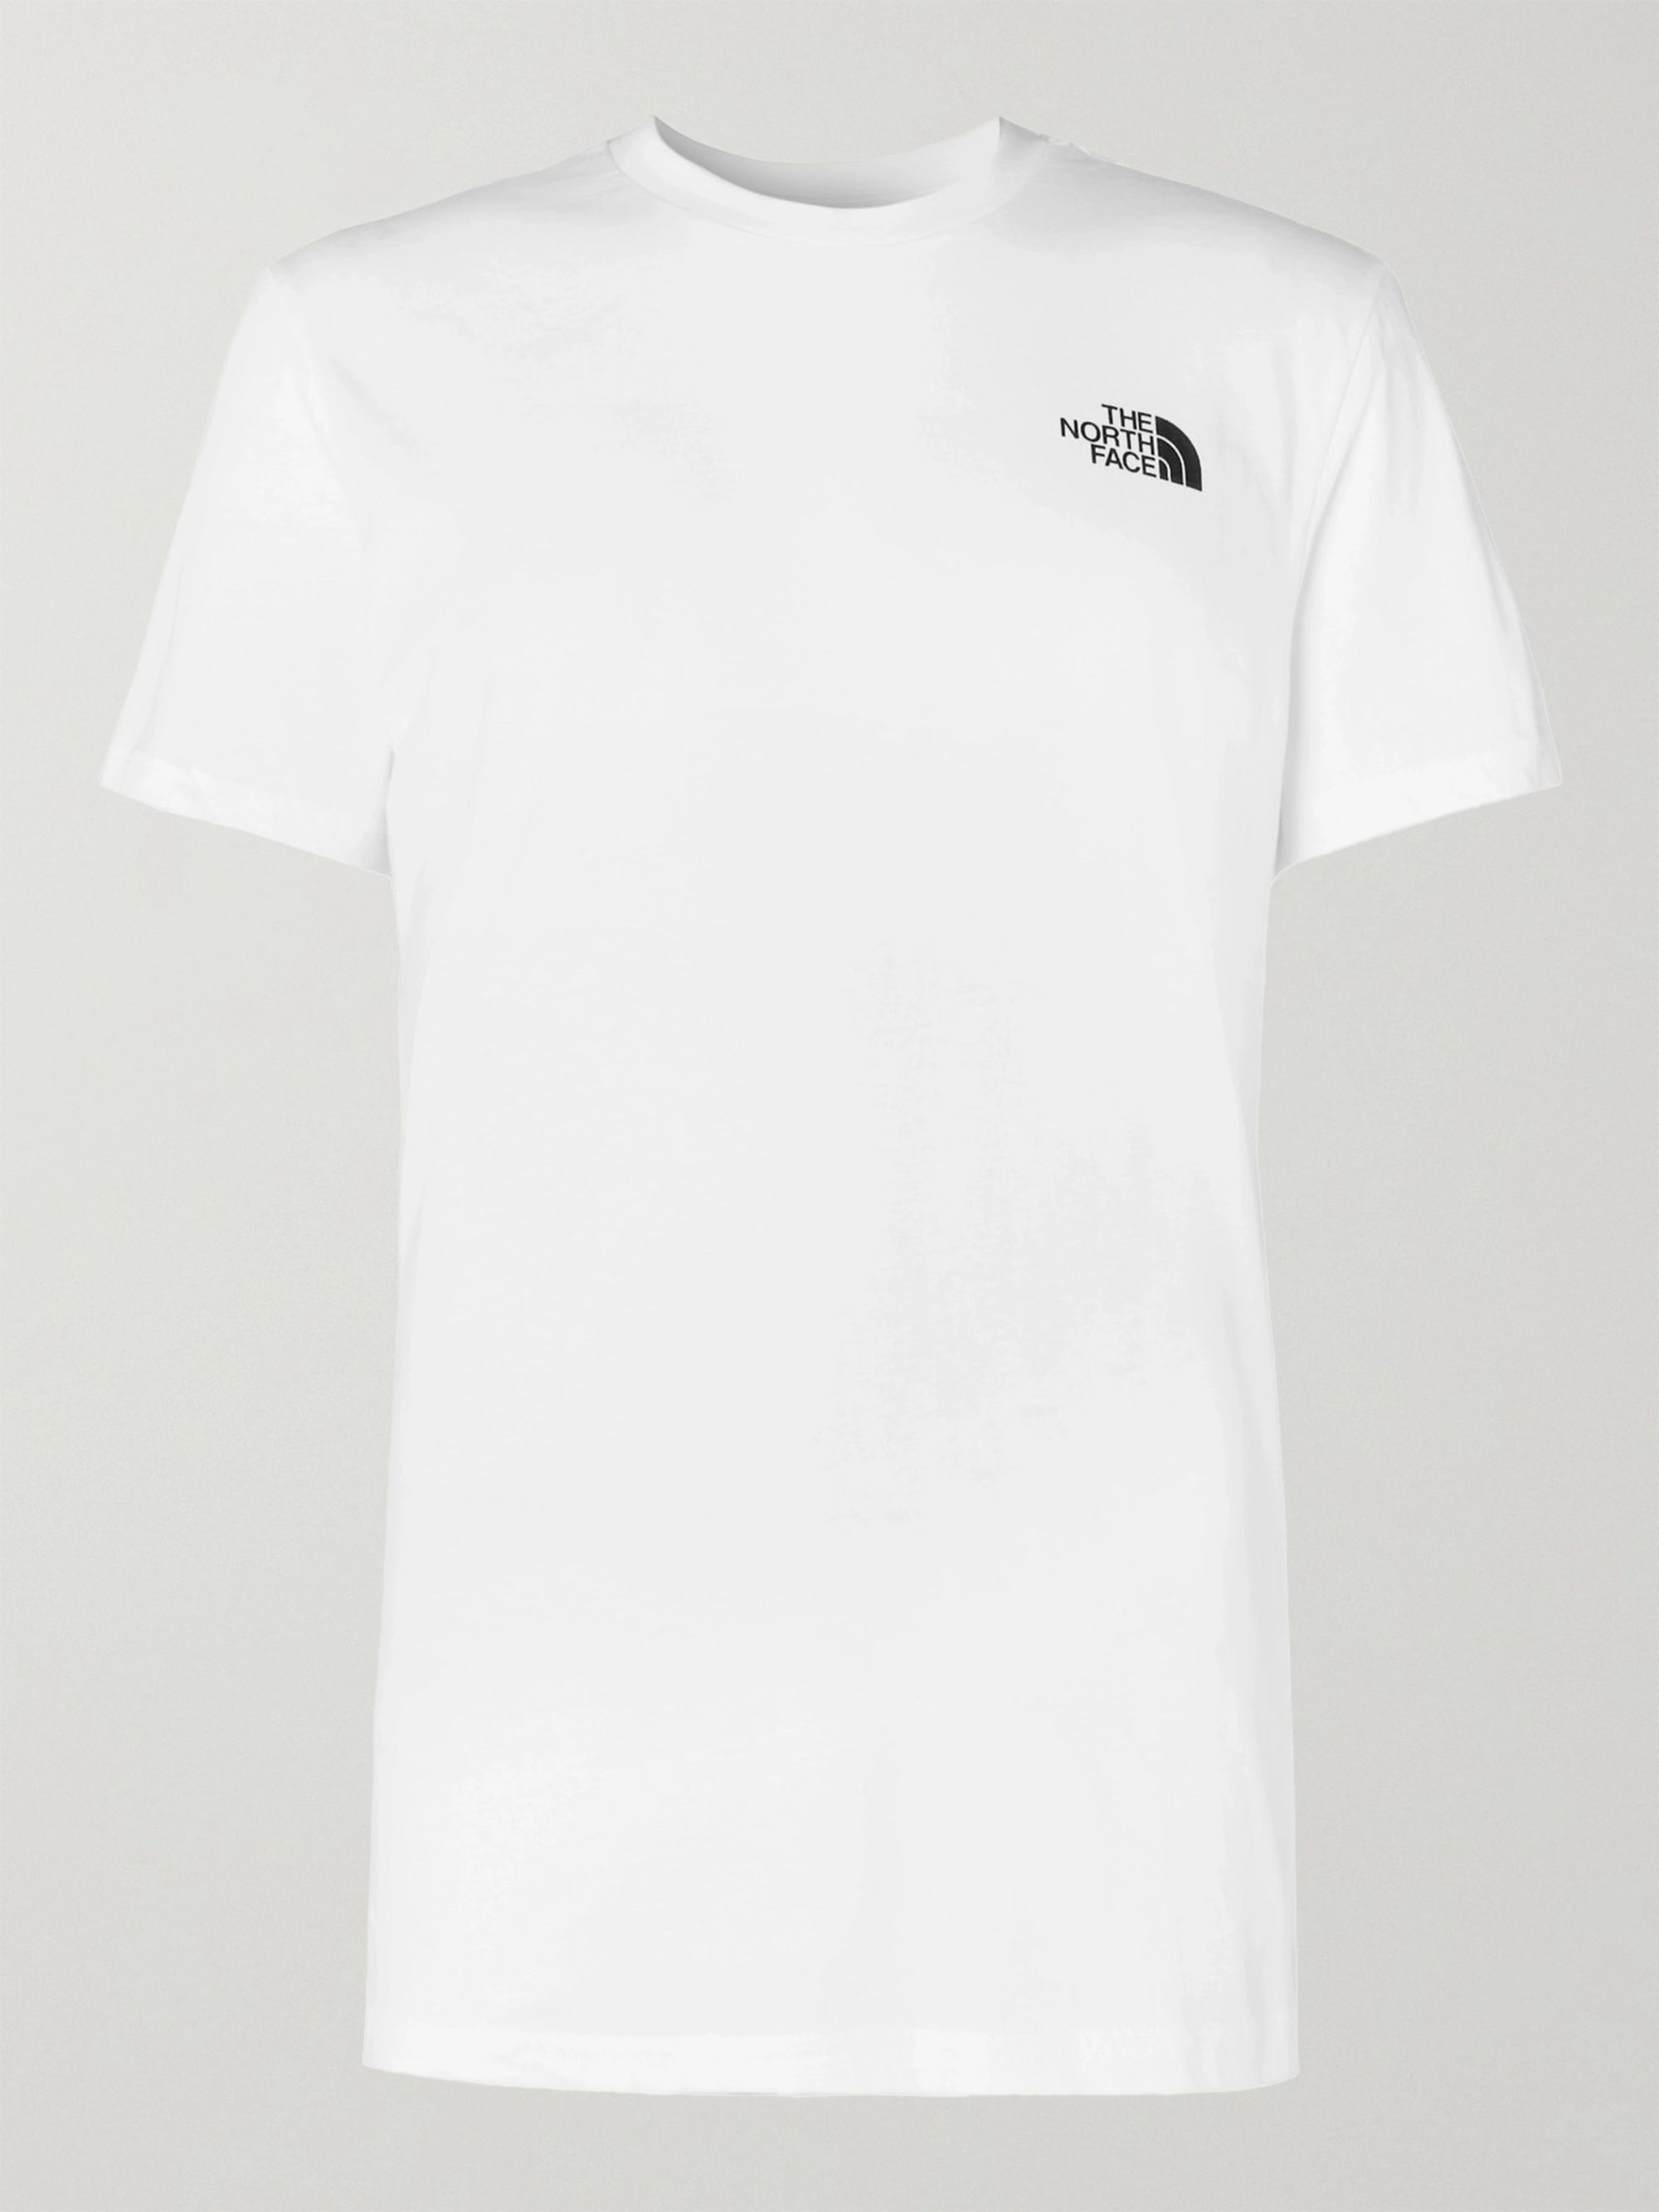 White Dome Logo Print Cotton Jersey T Shirt The North Face Mr